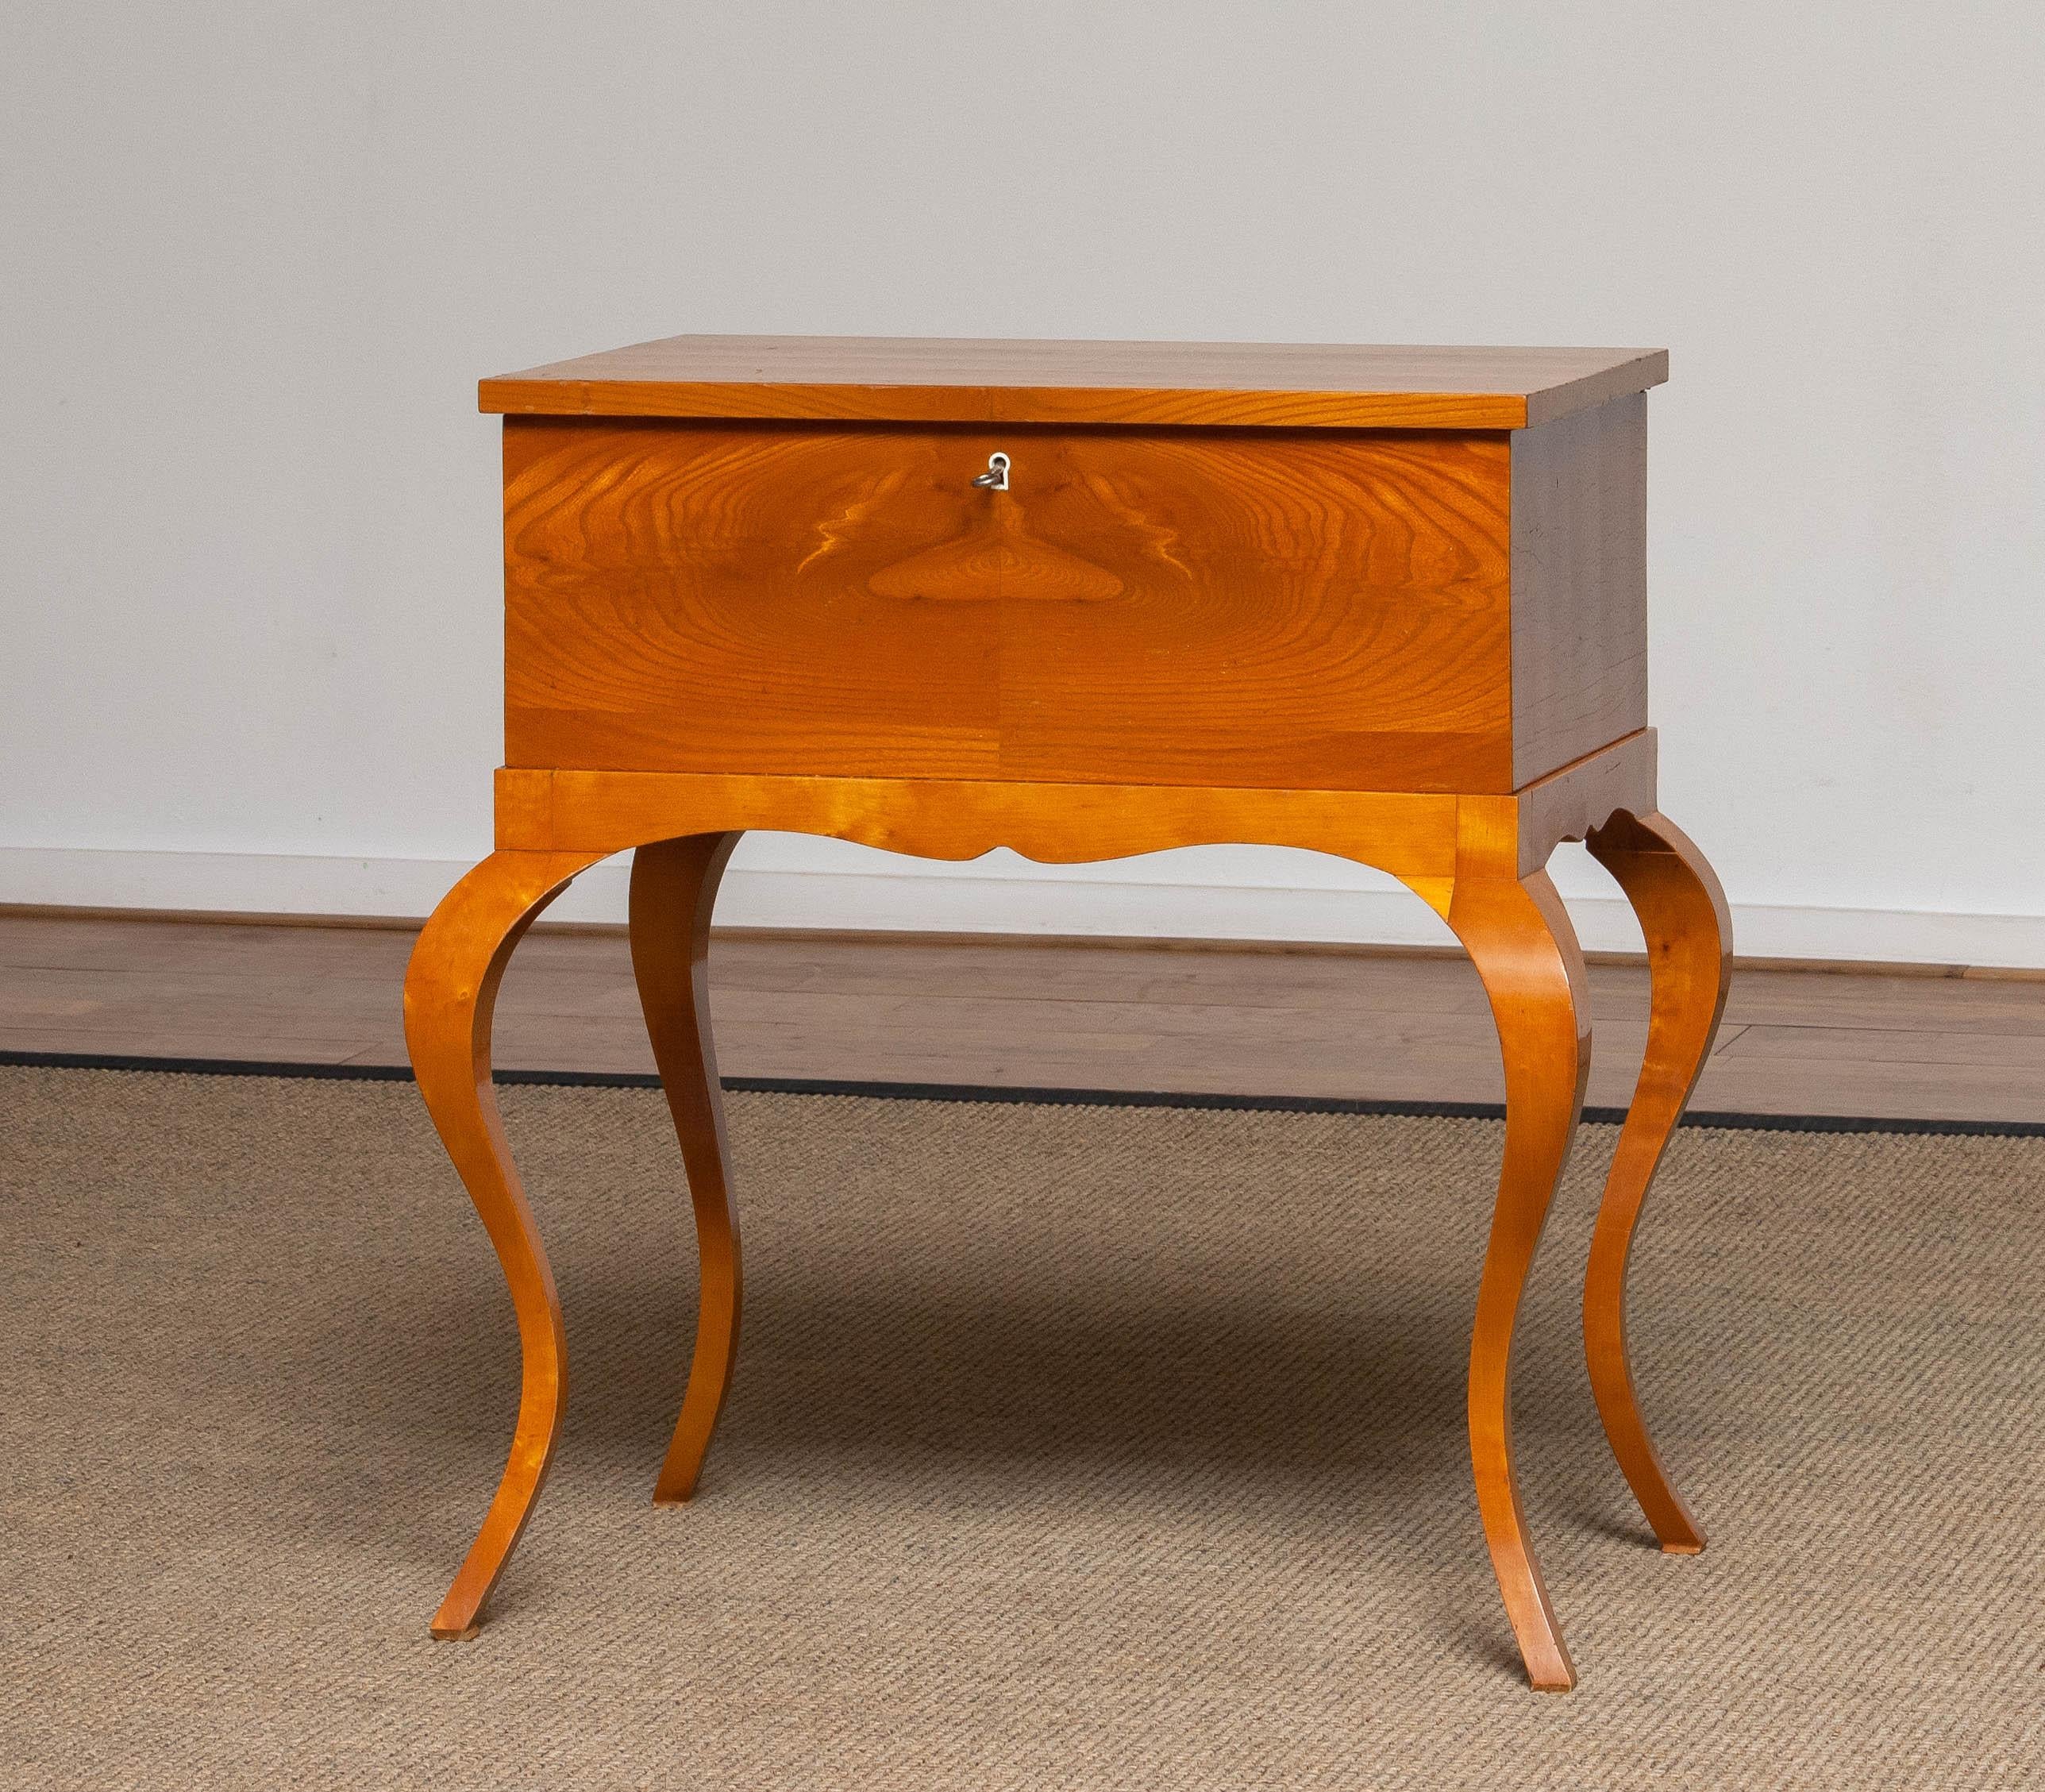 Beautiful Biedermeier sewing table / gueridon in open Elm book veneer. The Elm veneer shows extremely beautiful grains which makes this sewing table very decorative. Inside is a storage place for small sewing needs and underneath is space for